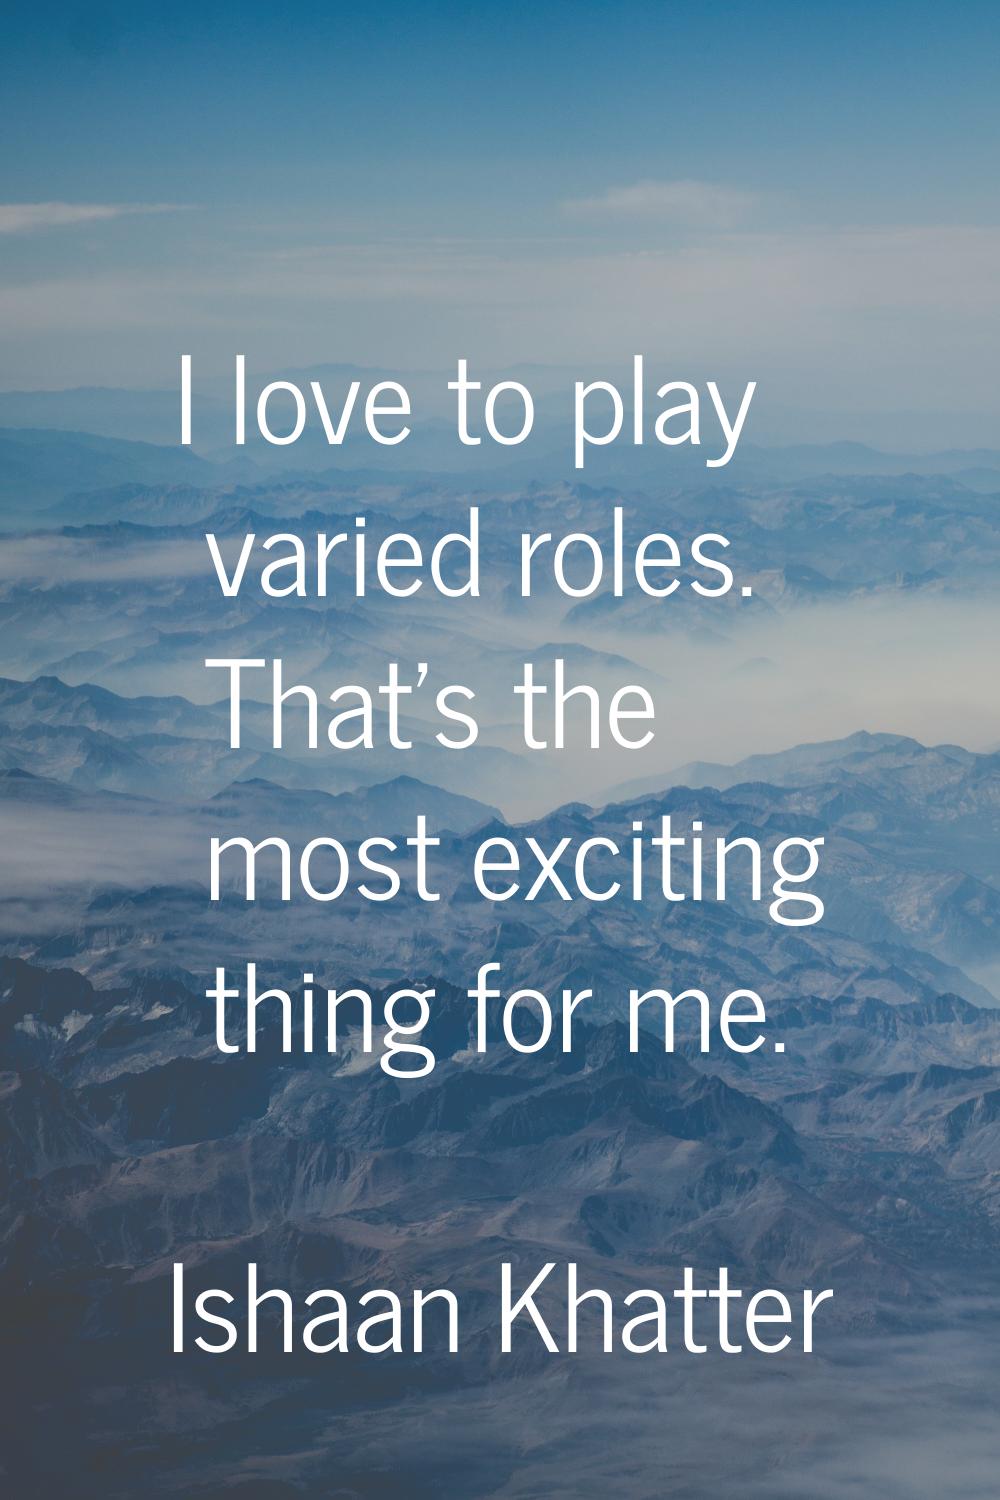 I love to play varied roles. That's the most exciting thing for me.